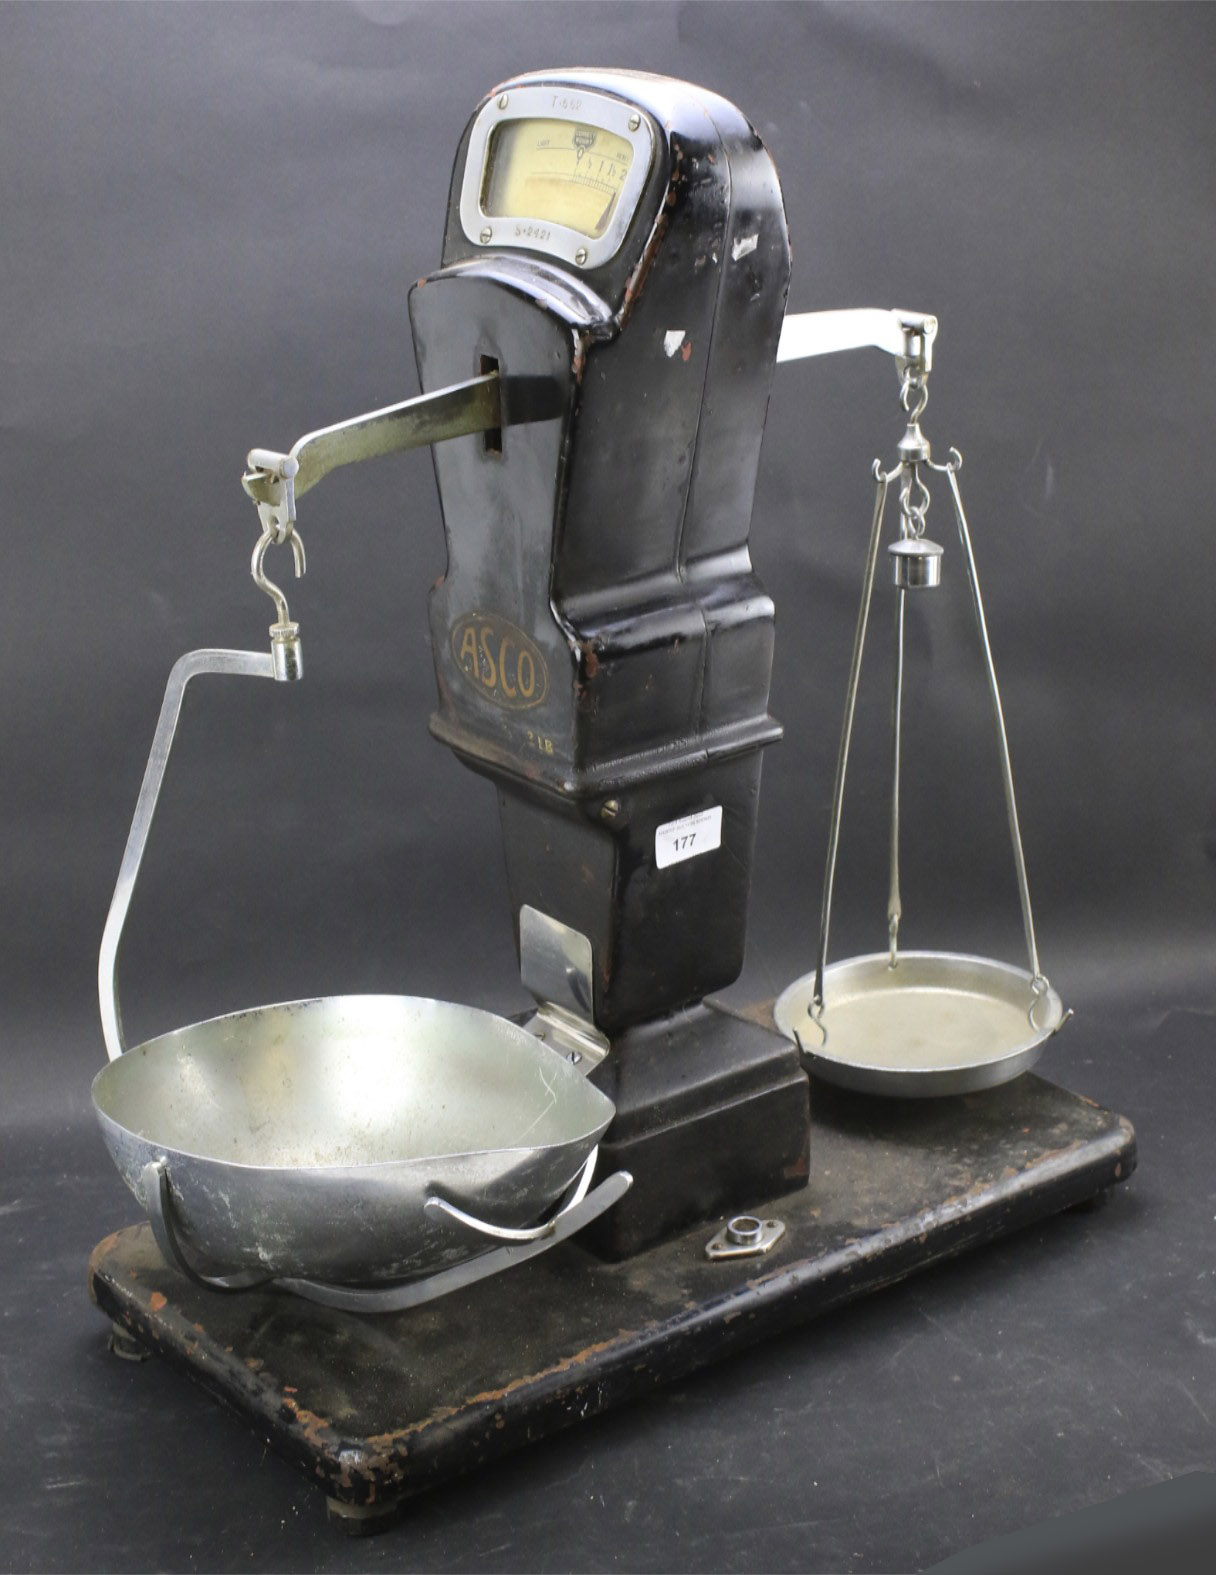 A set of Asco tobacco scales. Marked 'T.